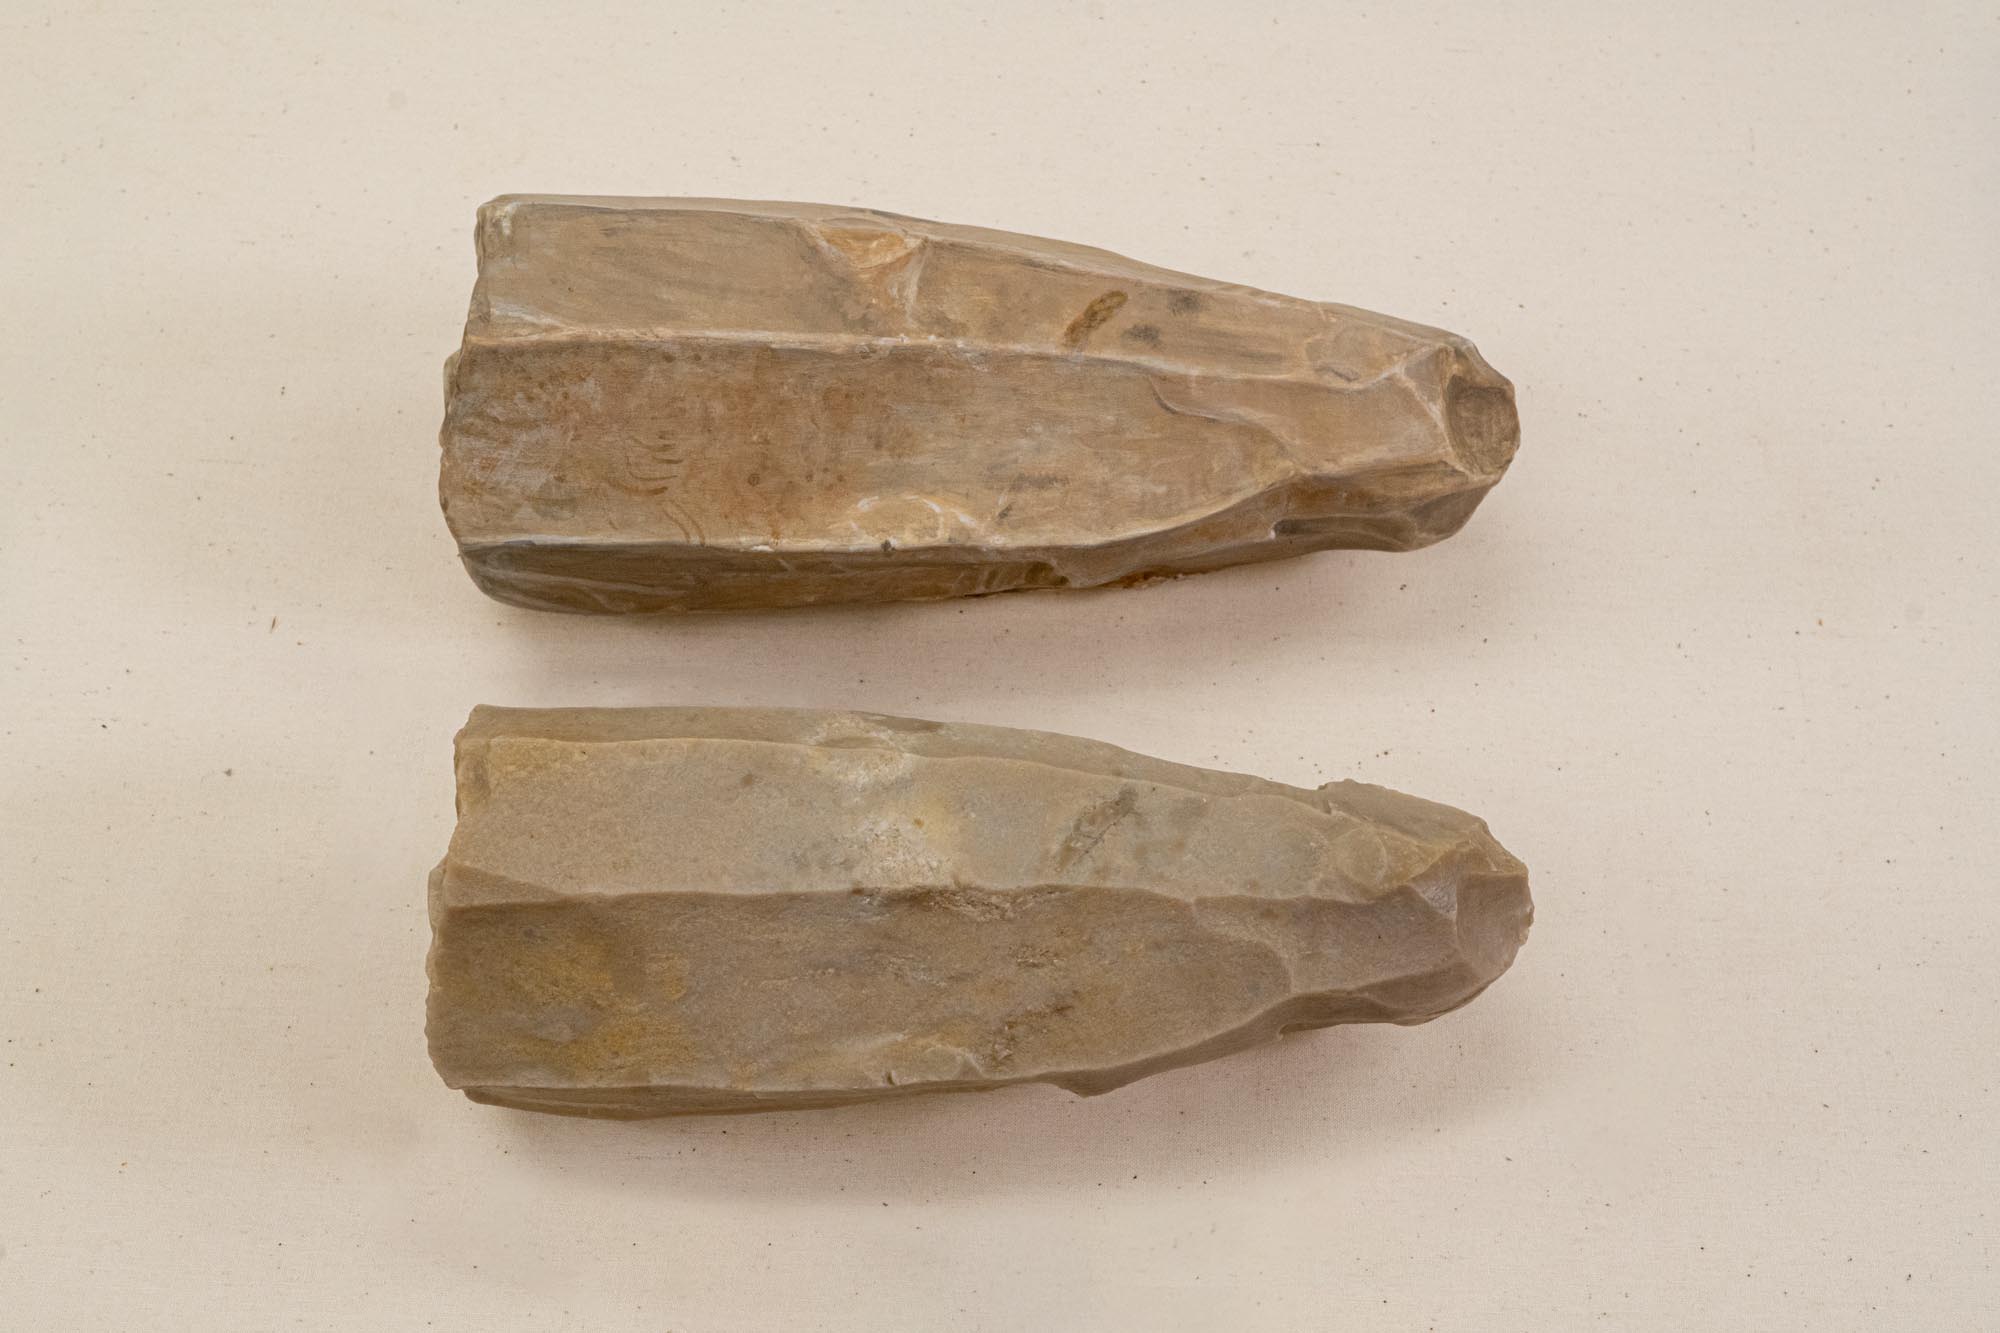 Clovis points would have been struck from this core 13,000 years ago. It